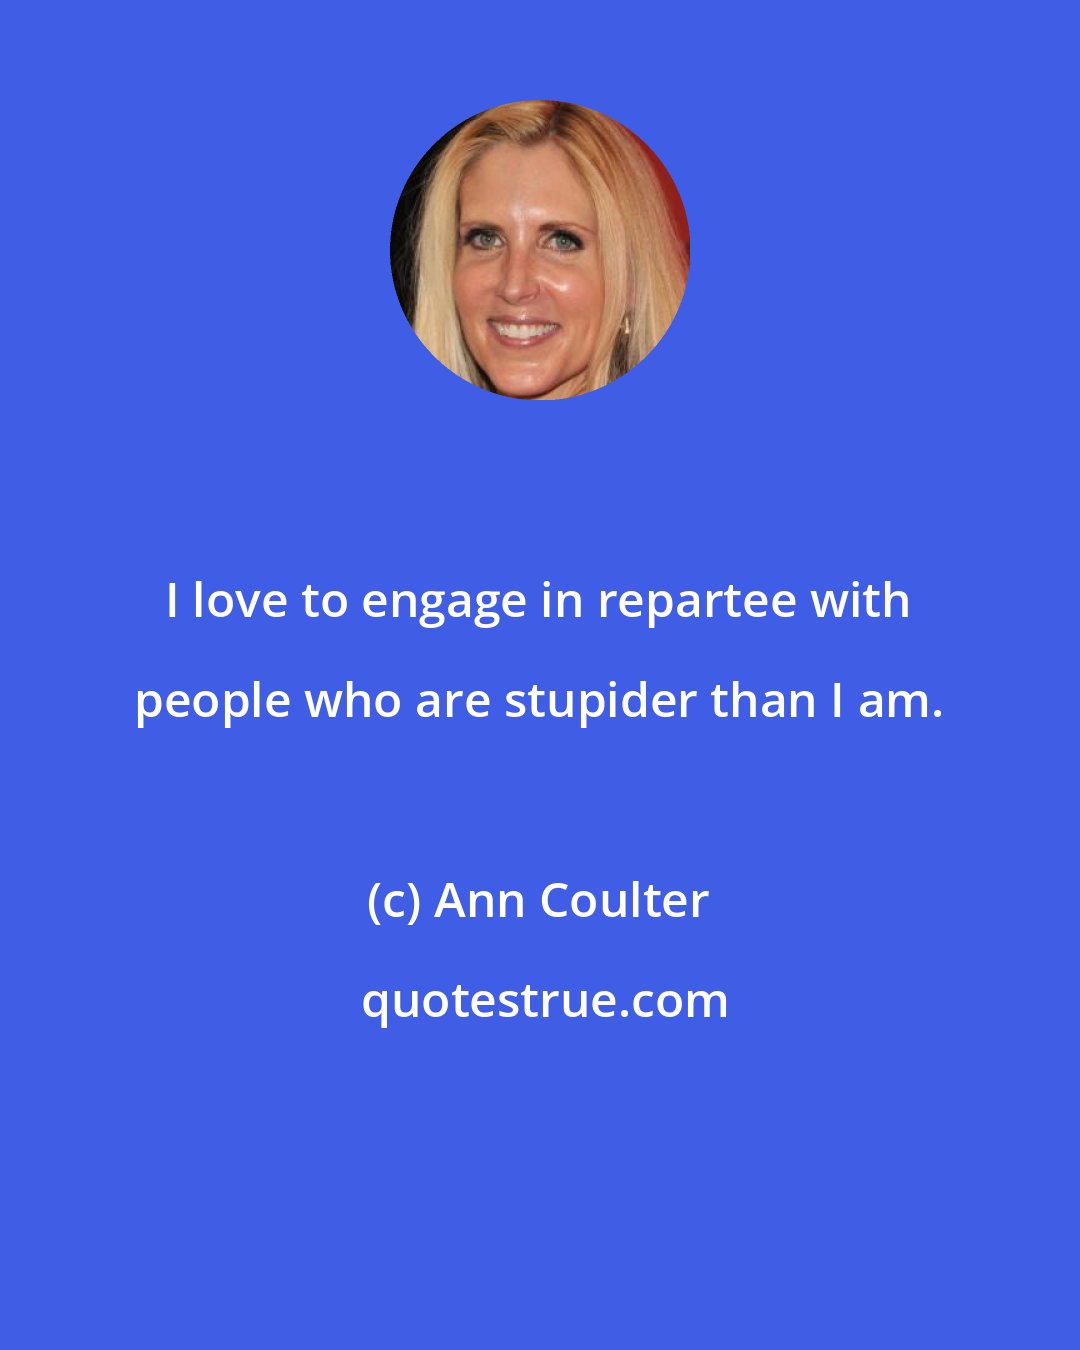 Ann Coulter: I love to engage in repartee with people who are stupider than I am.